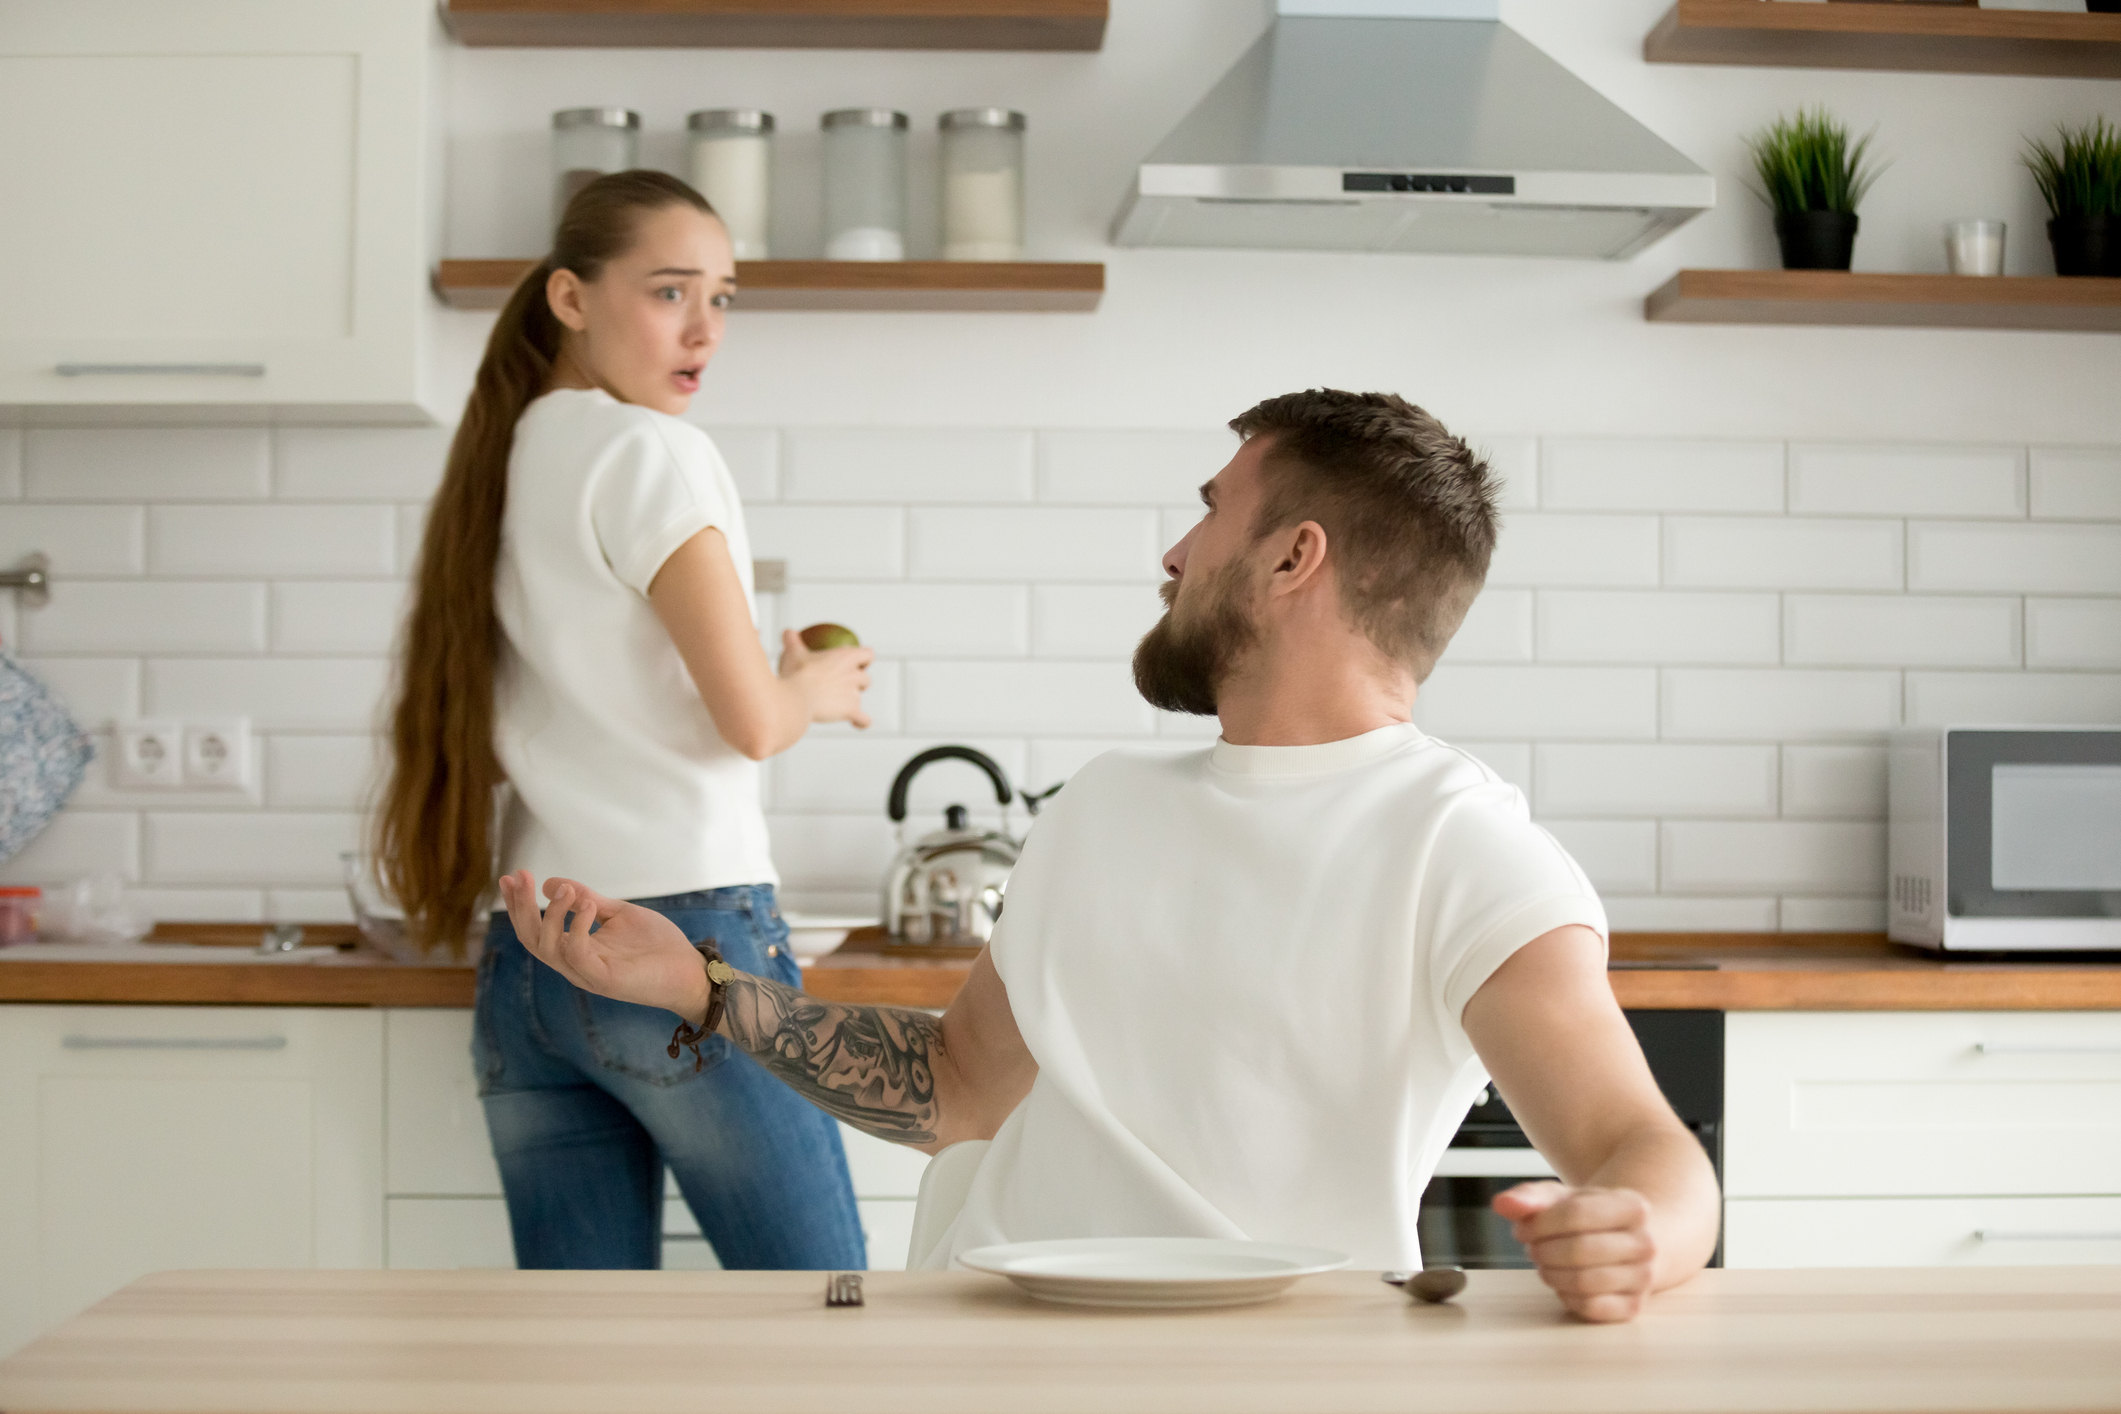 couple in kitchen, woman is at stove with a shocked look while man turns around and shrugs at her